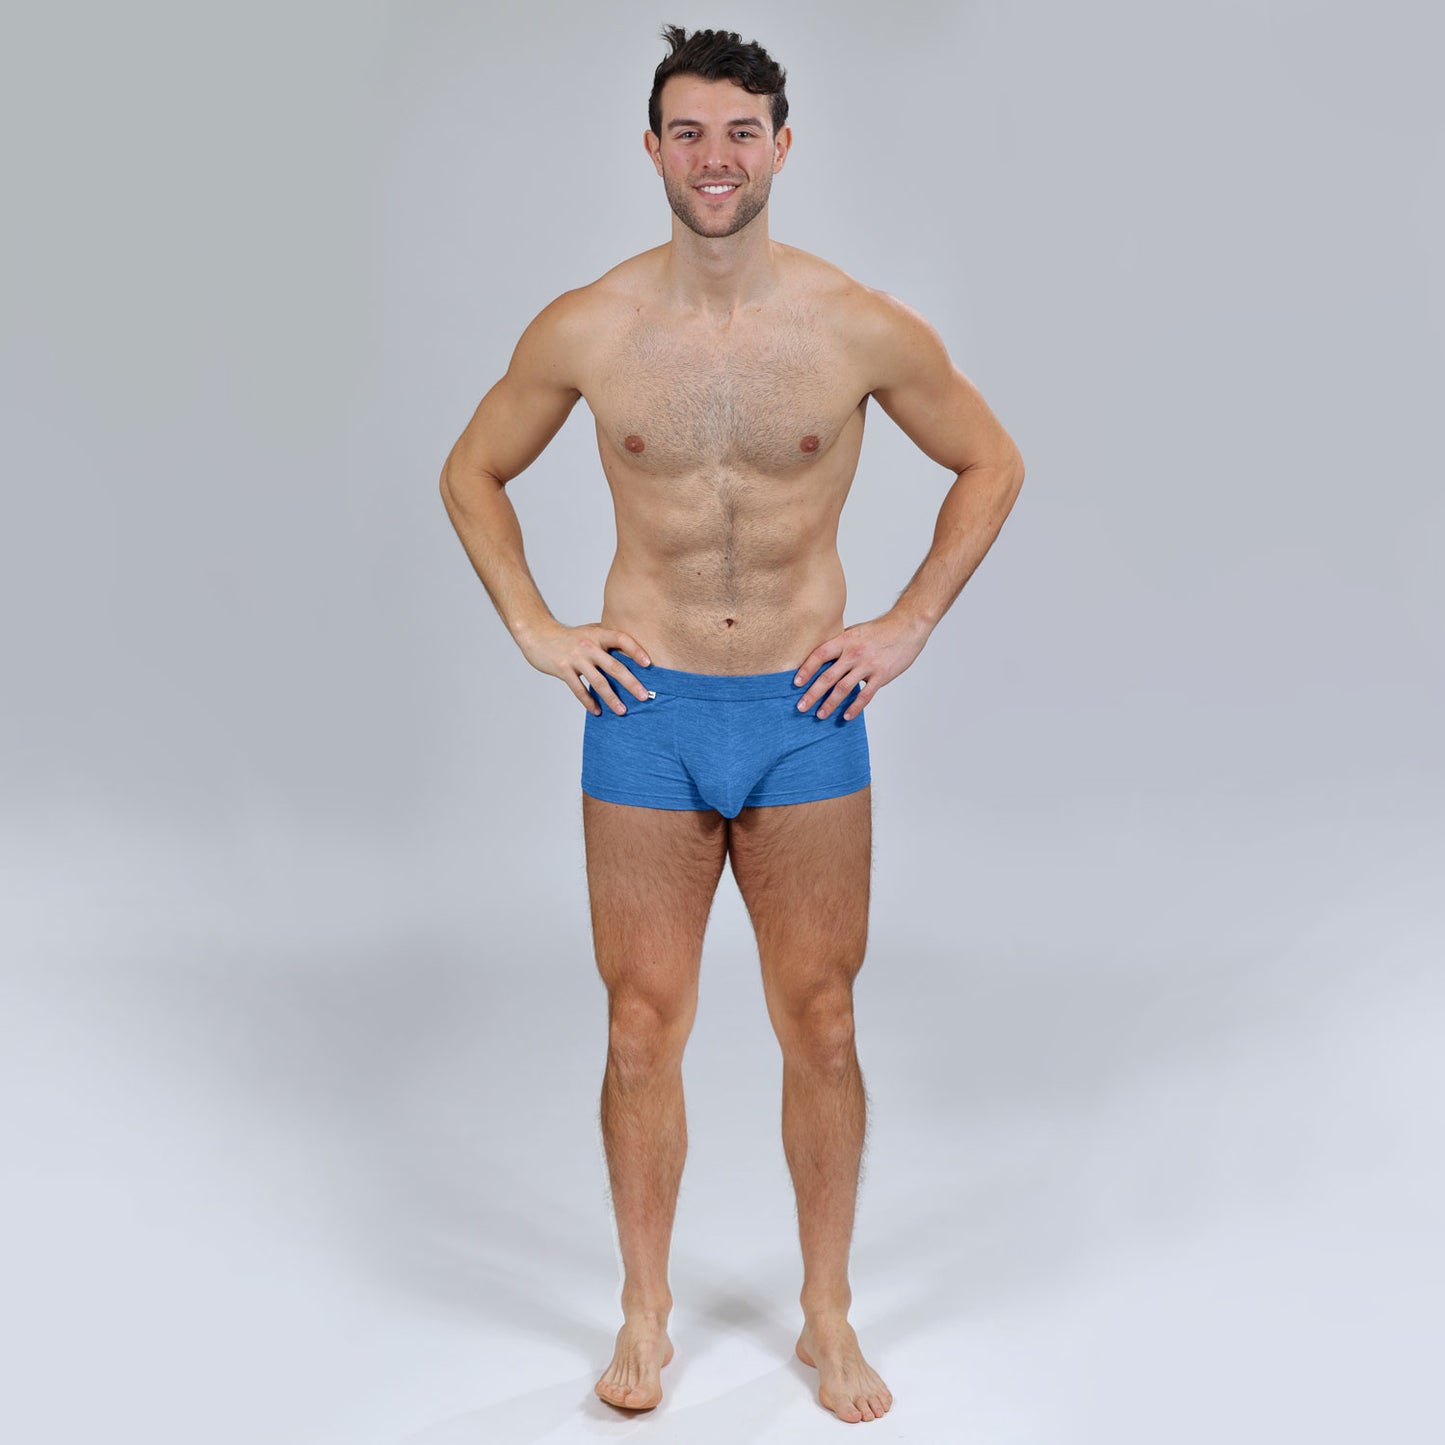 The Limited Edition Laptis Blue Trunks for men in the USA and Canada